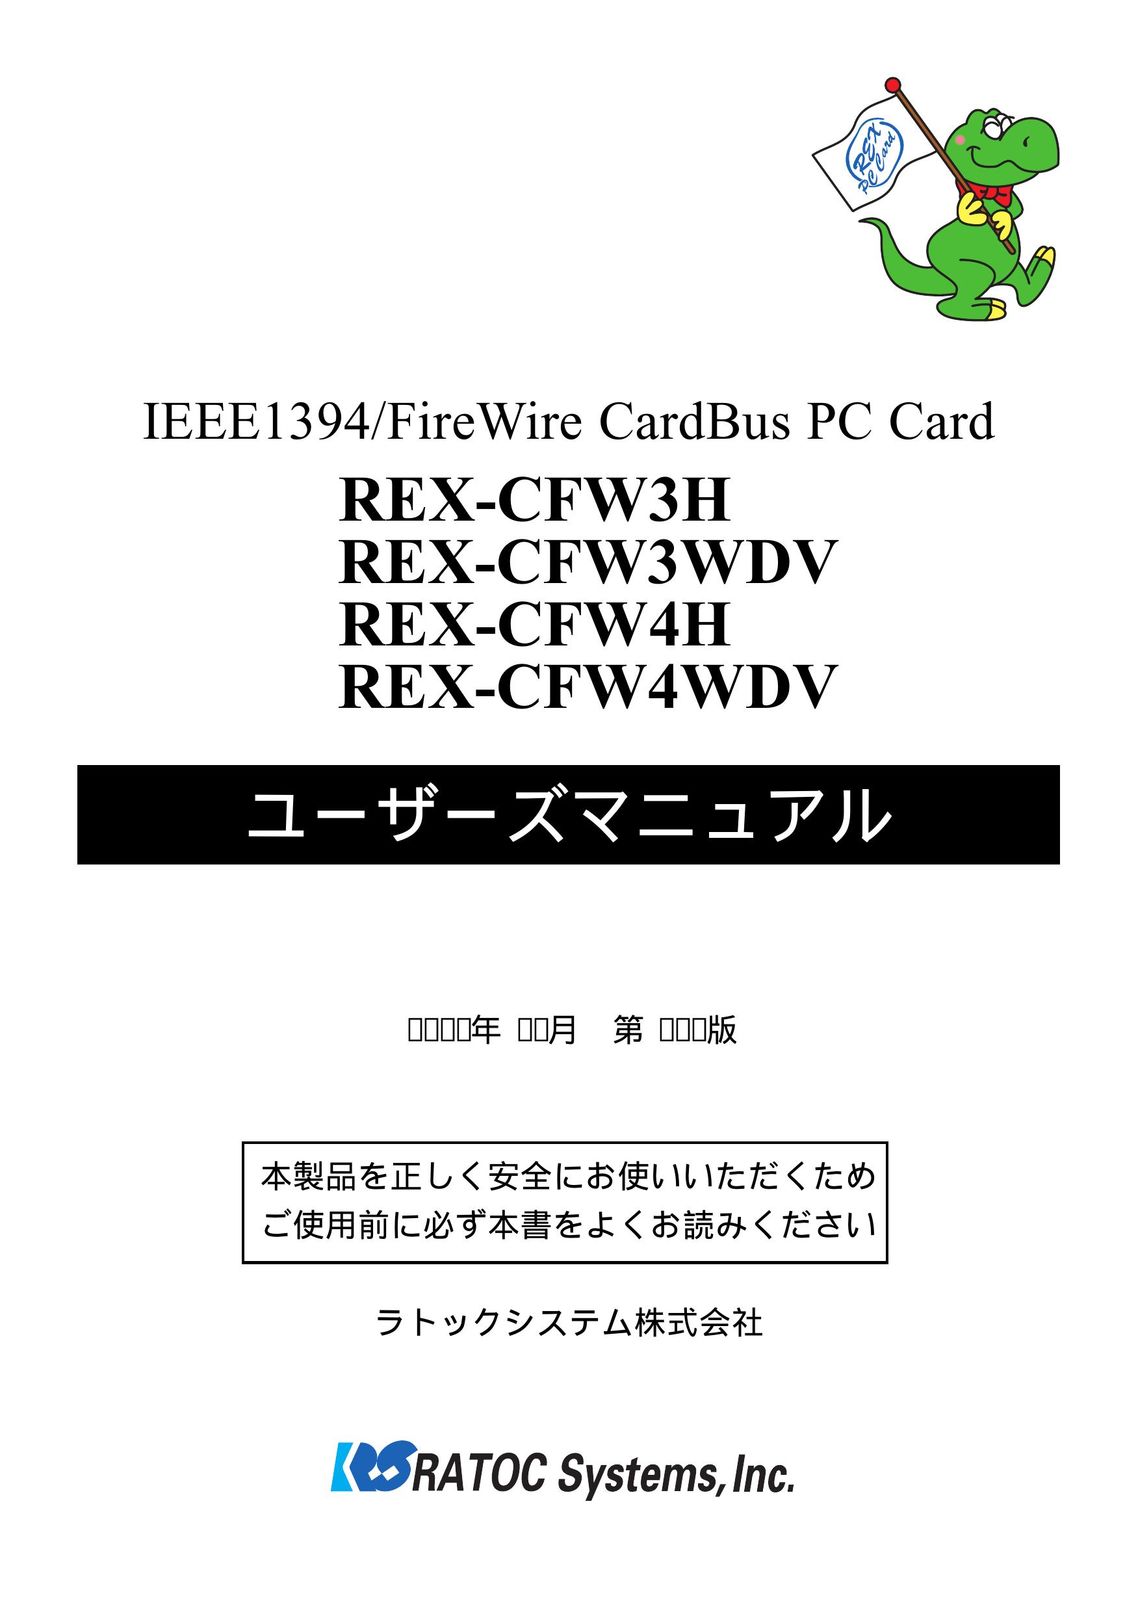 Ratoc Systems REX-CFW3WDV Network Card User Manual